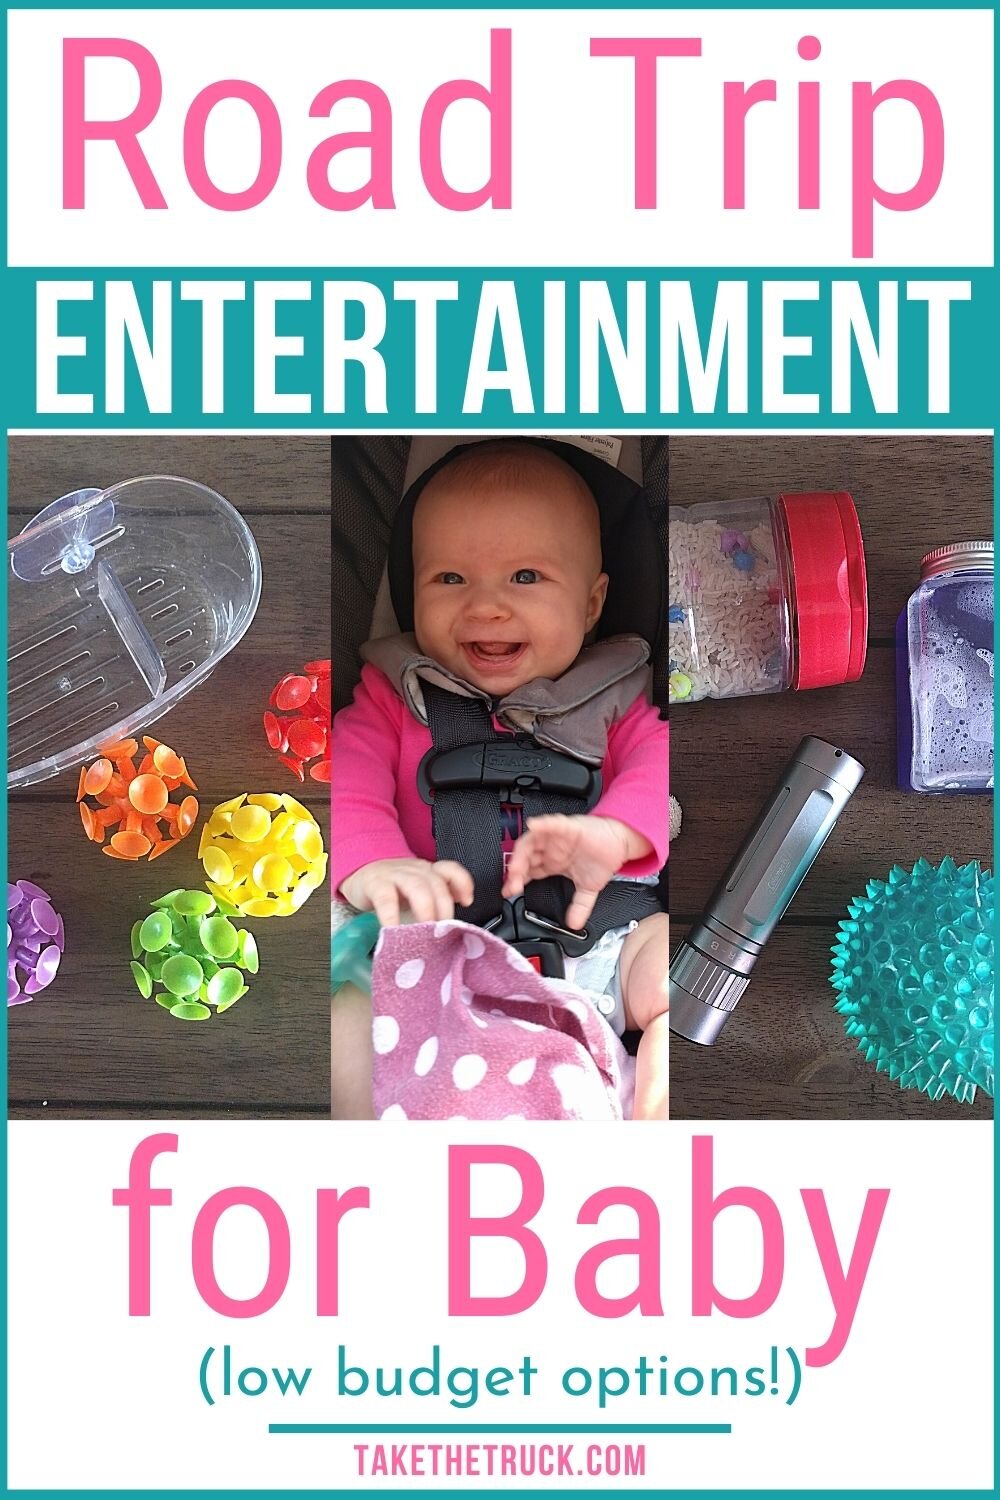 If you’re taking a budget road trip with your baby, check out this post for inexpensive travel toys just right for a baby or one year old. Don’t spend your money on baby road trip travel toys!